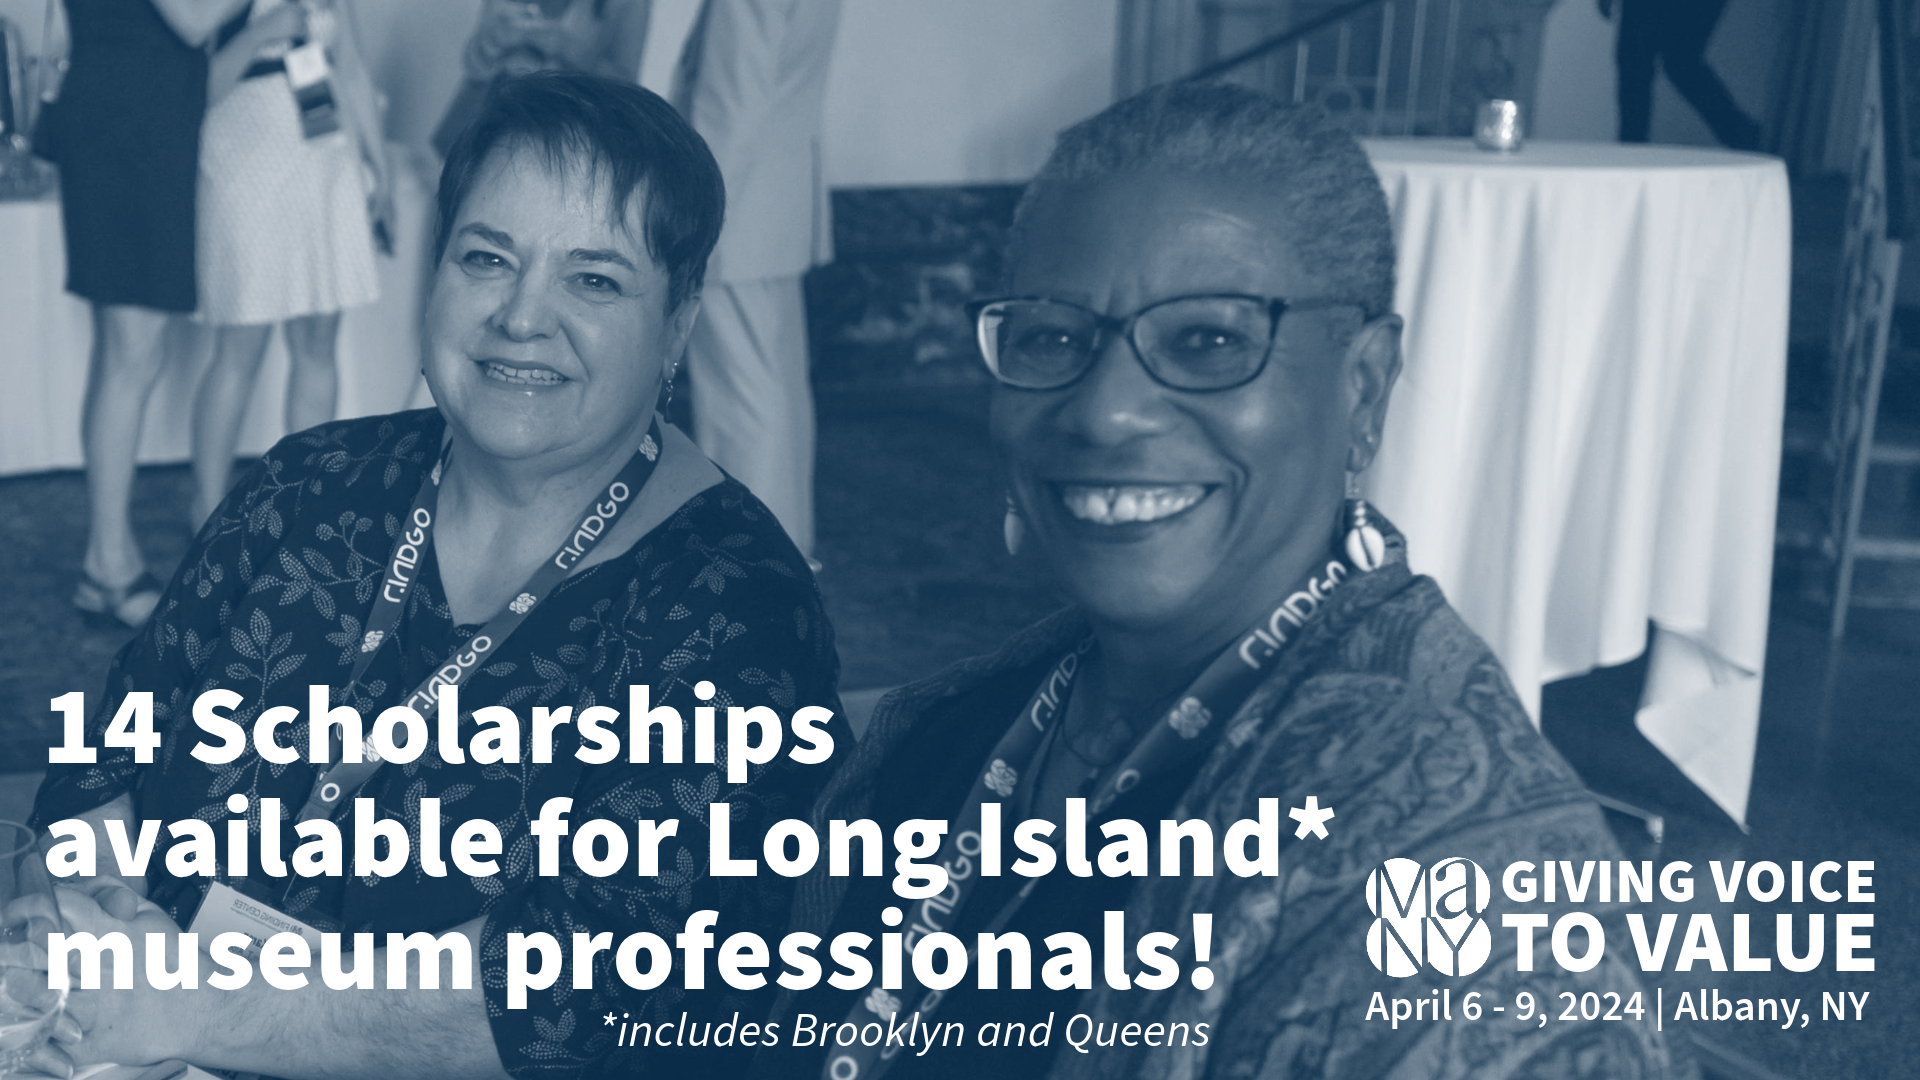 MANY Scholarships Available for Long Island Museum Professionals!